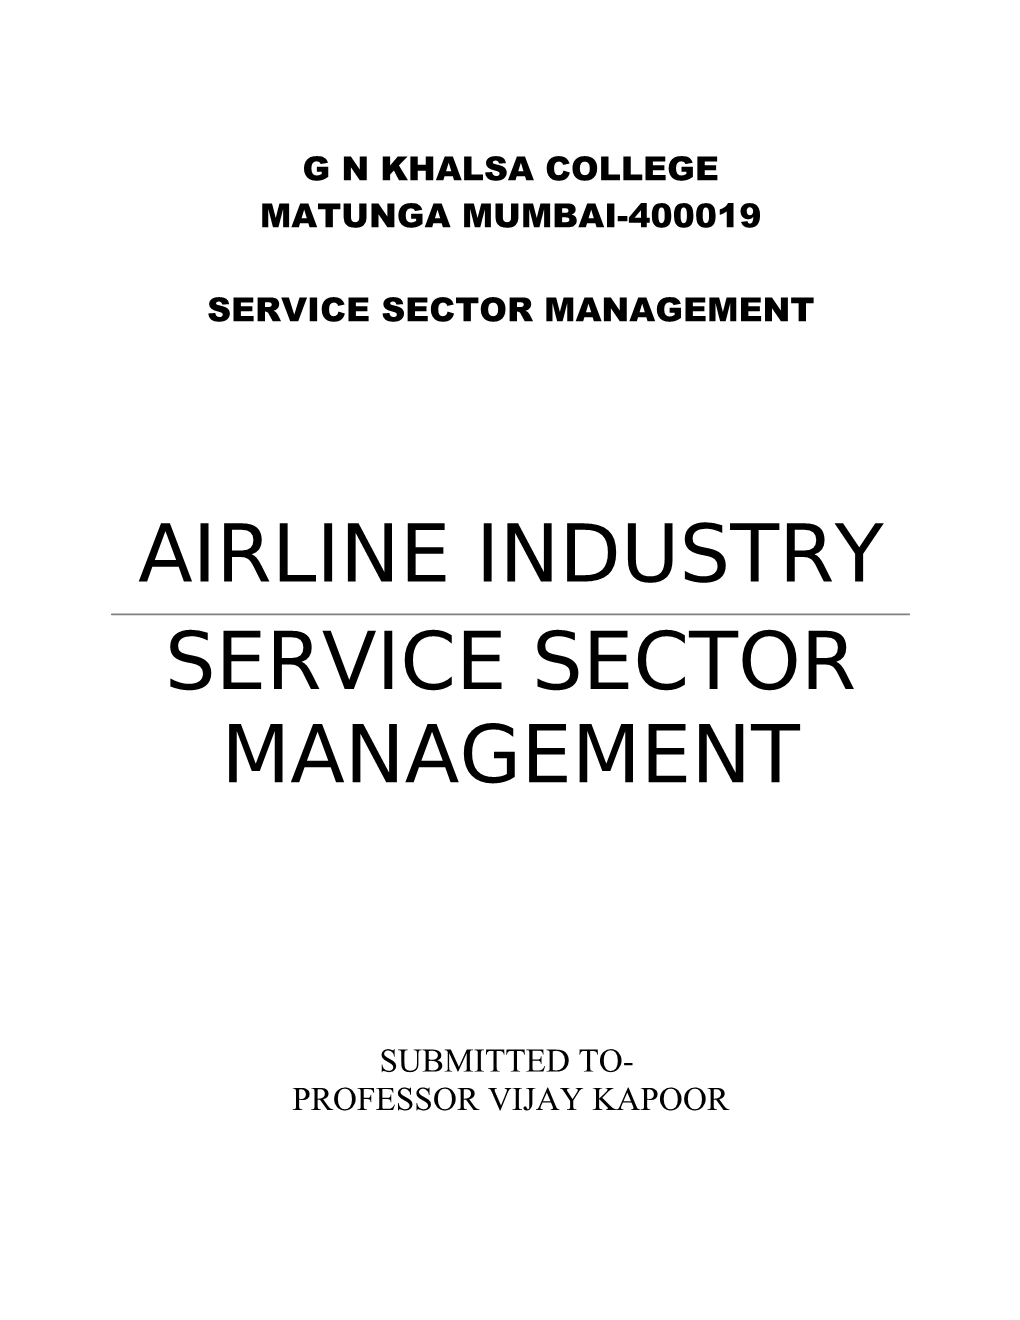 Airline Industry Service Sector Management